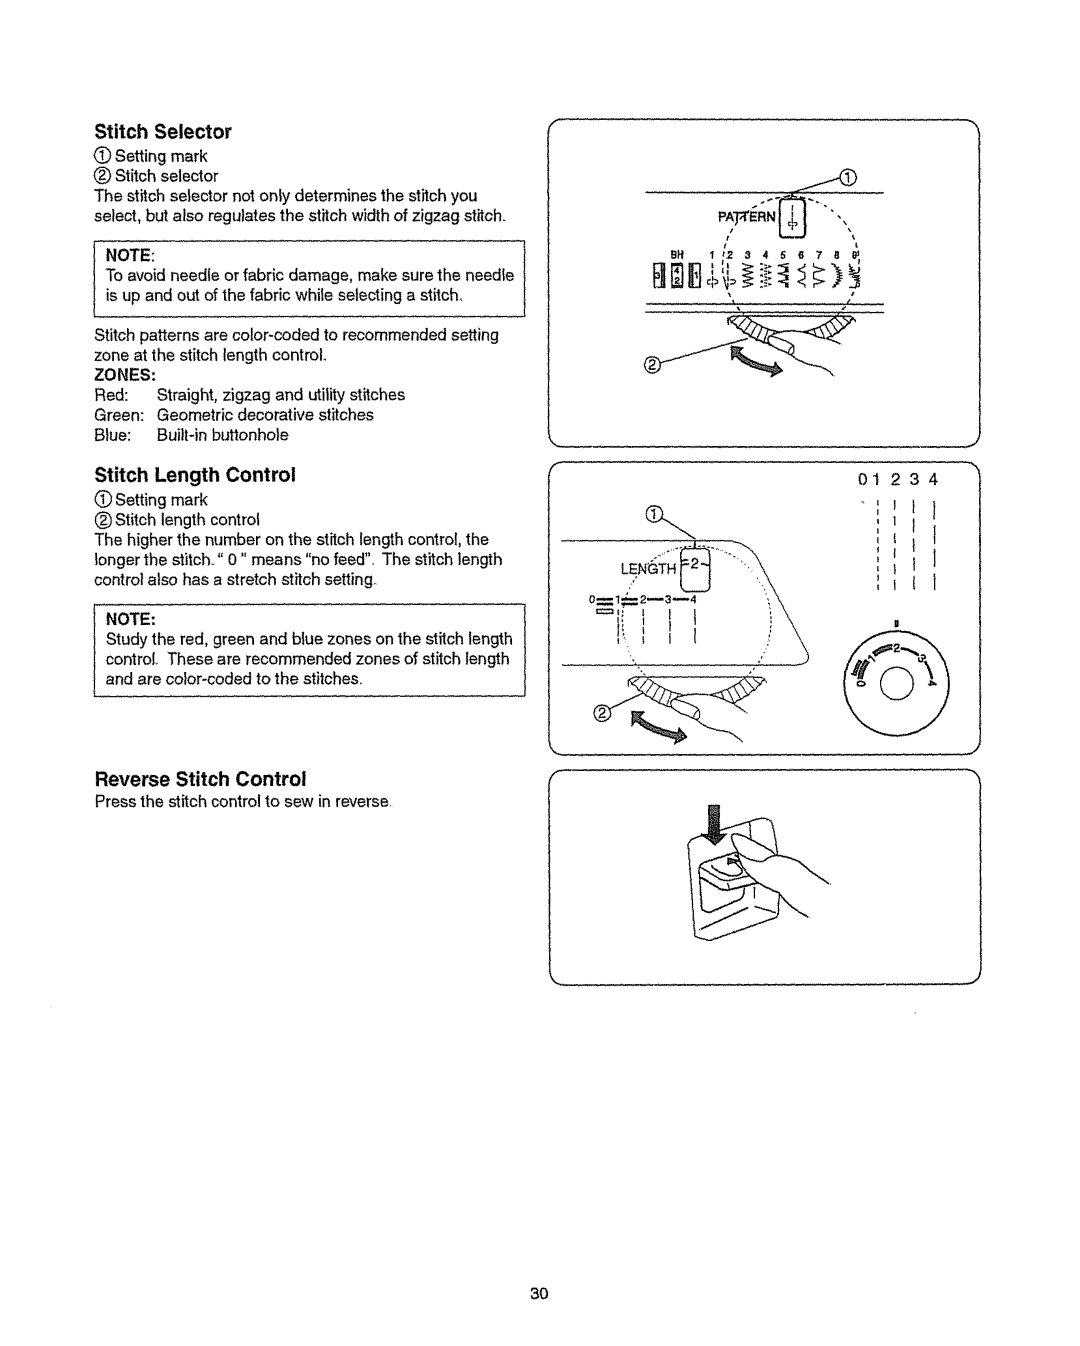 Kenmore 385.151082 owner manual Stitch Selector, Stitch Length Control, Reverse Stitch Control 